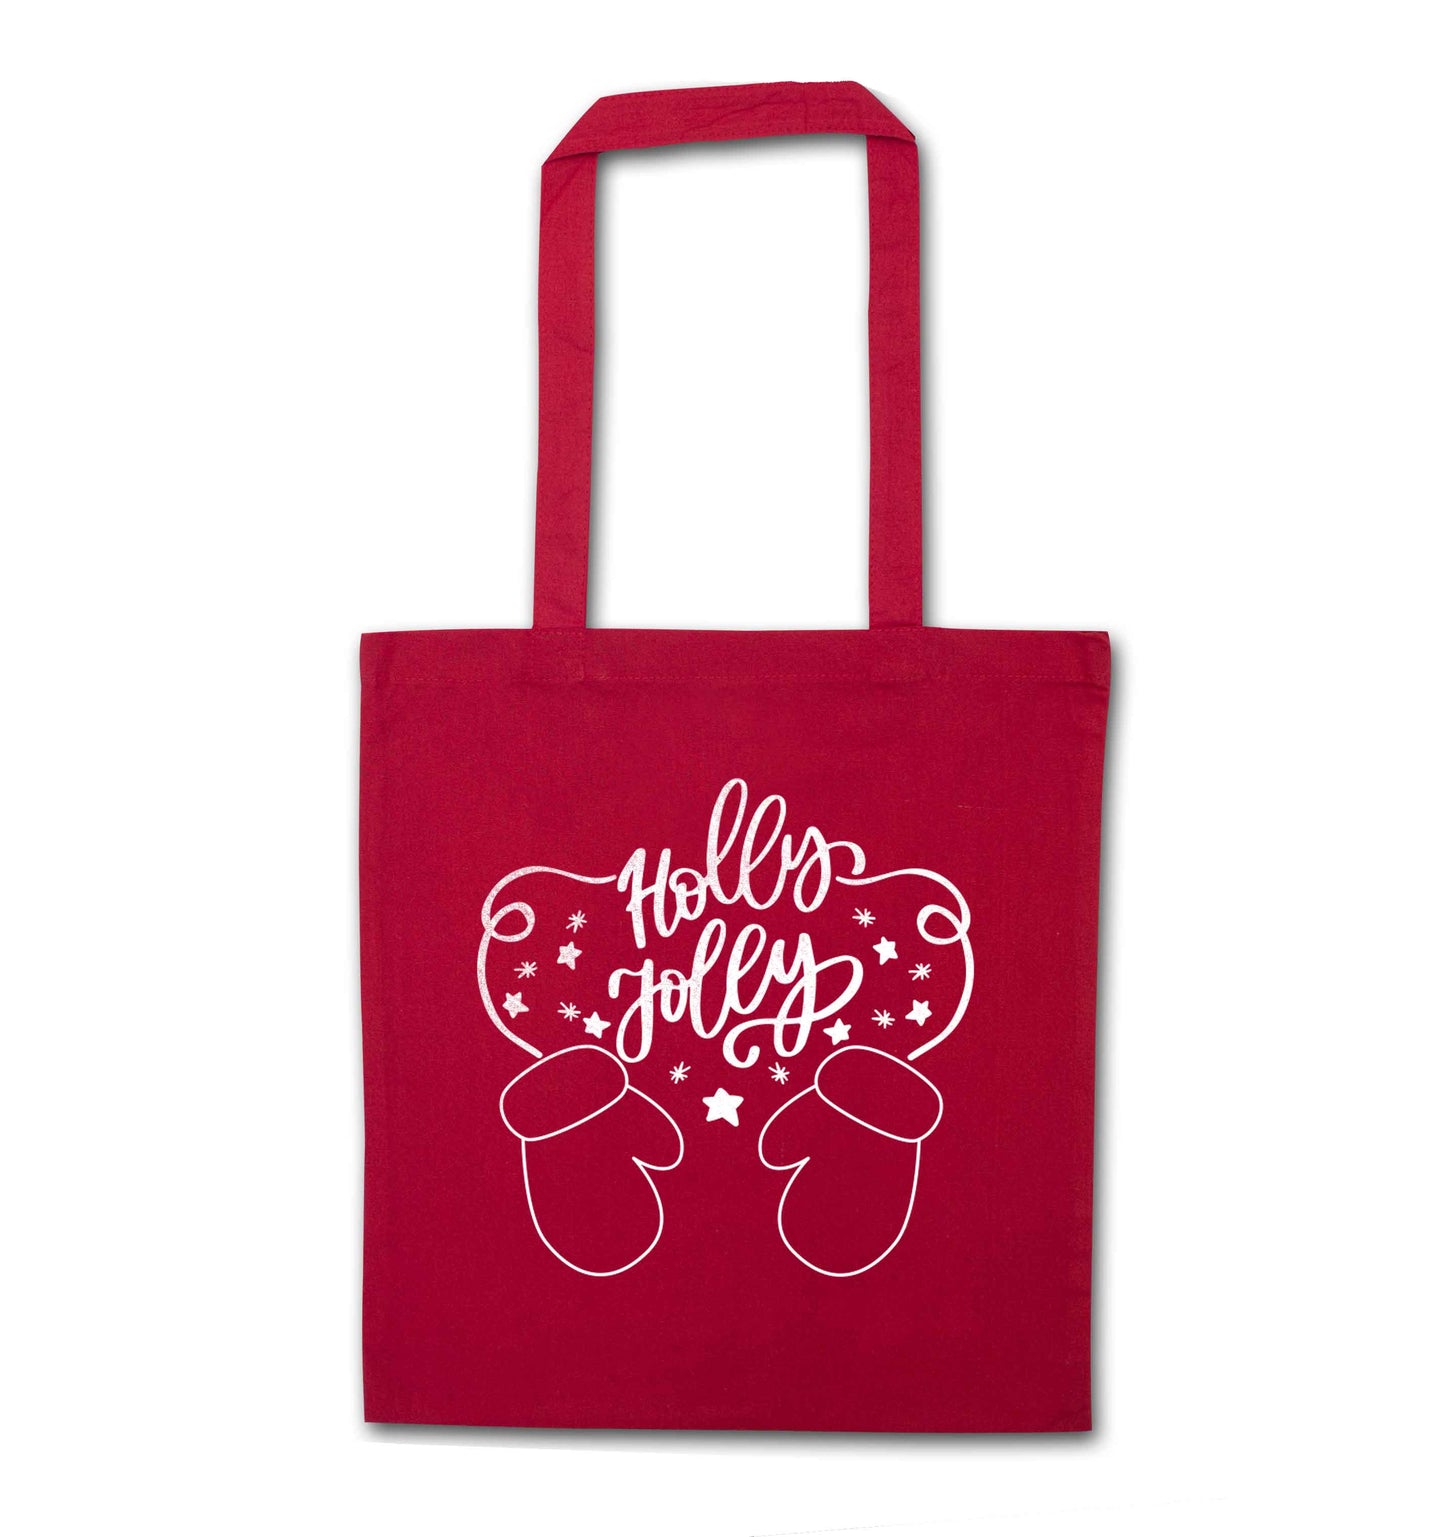 Holly jolly red tote bag